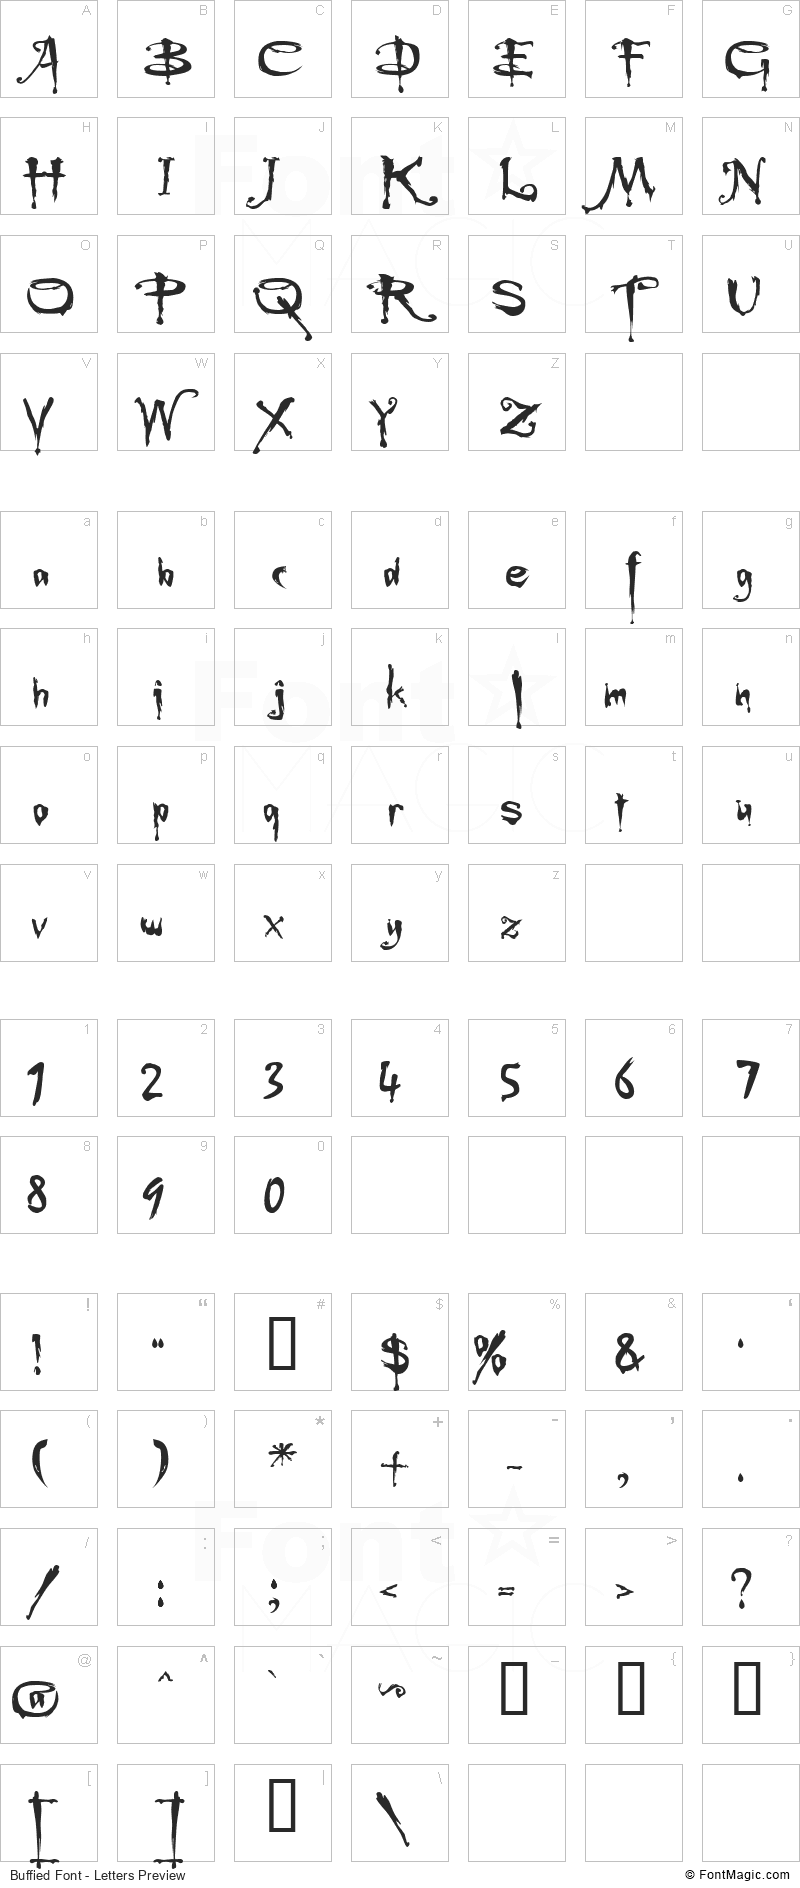 Buffied Font - All Latters Preview Chart